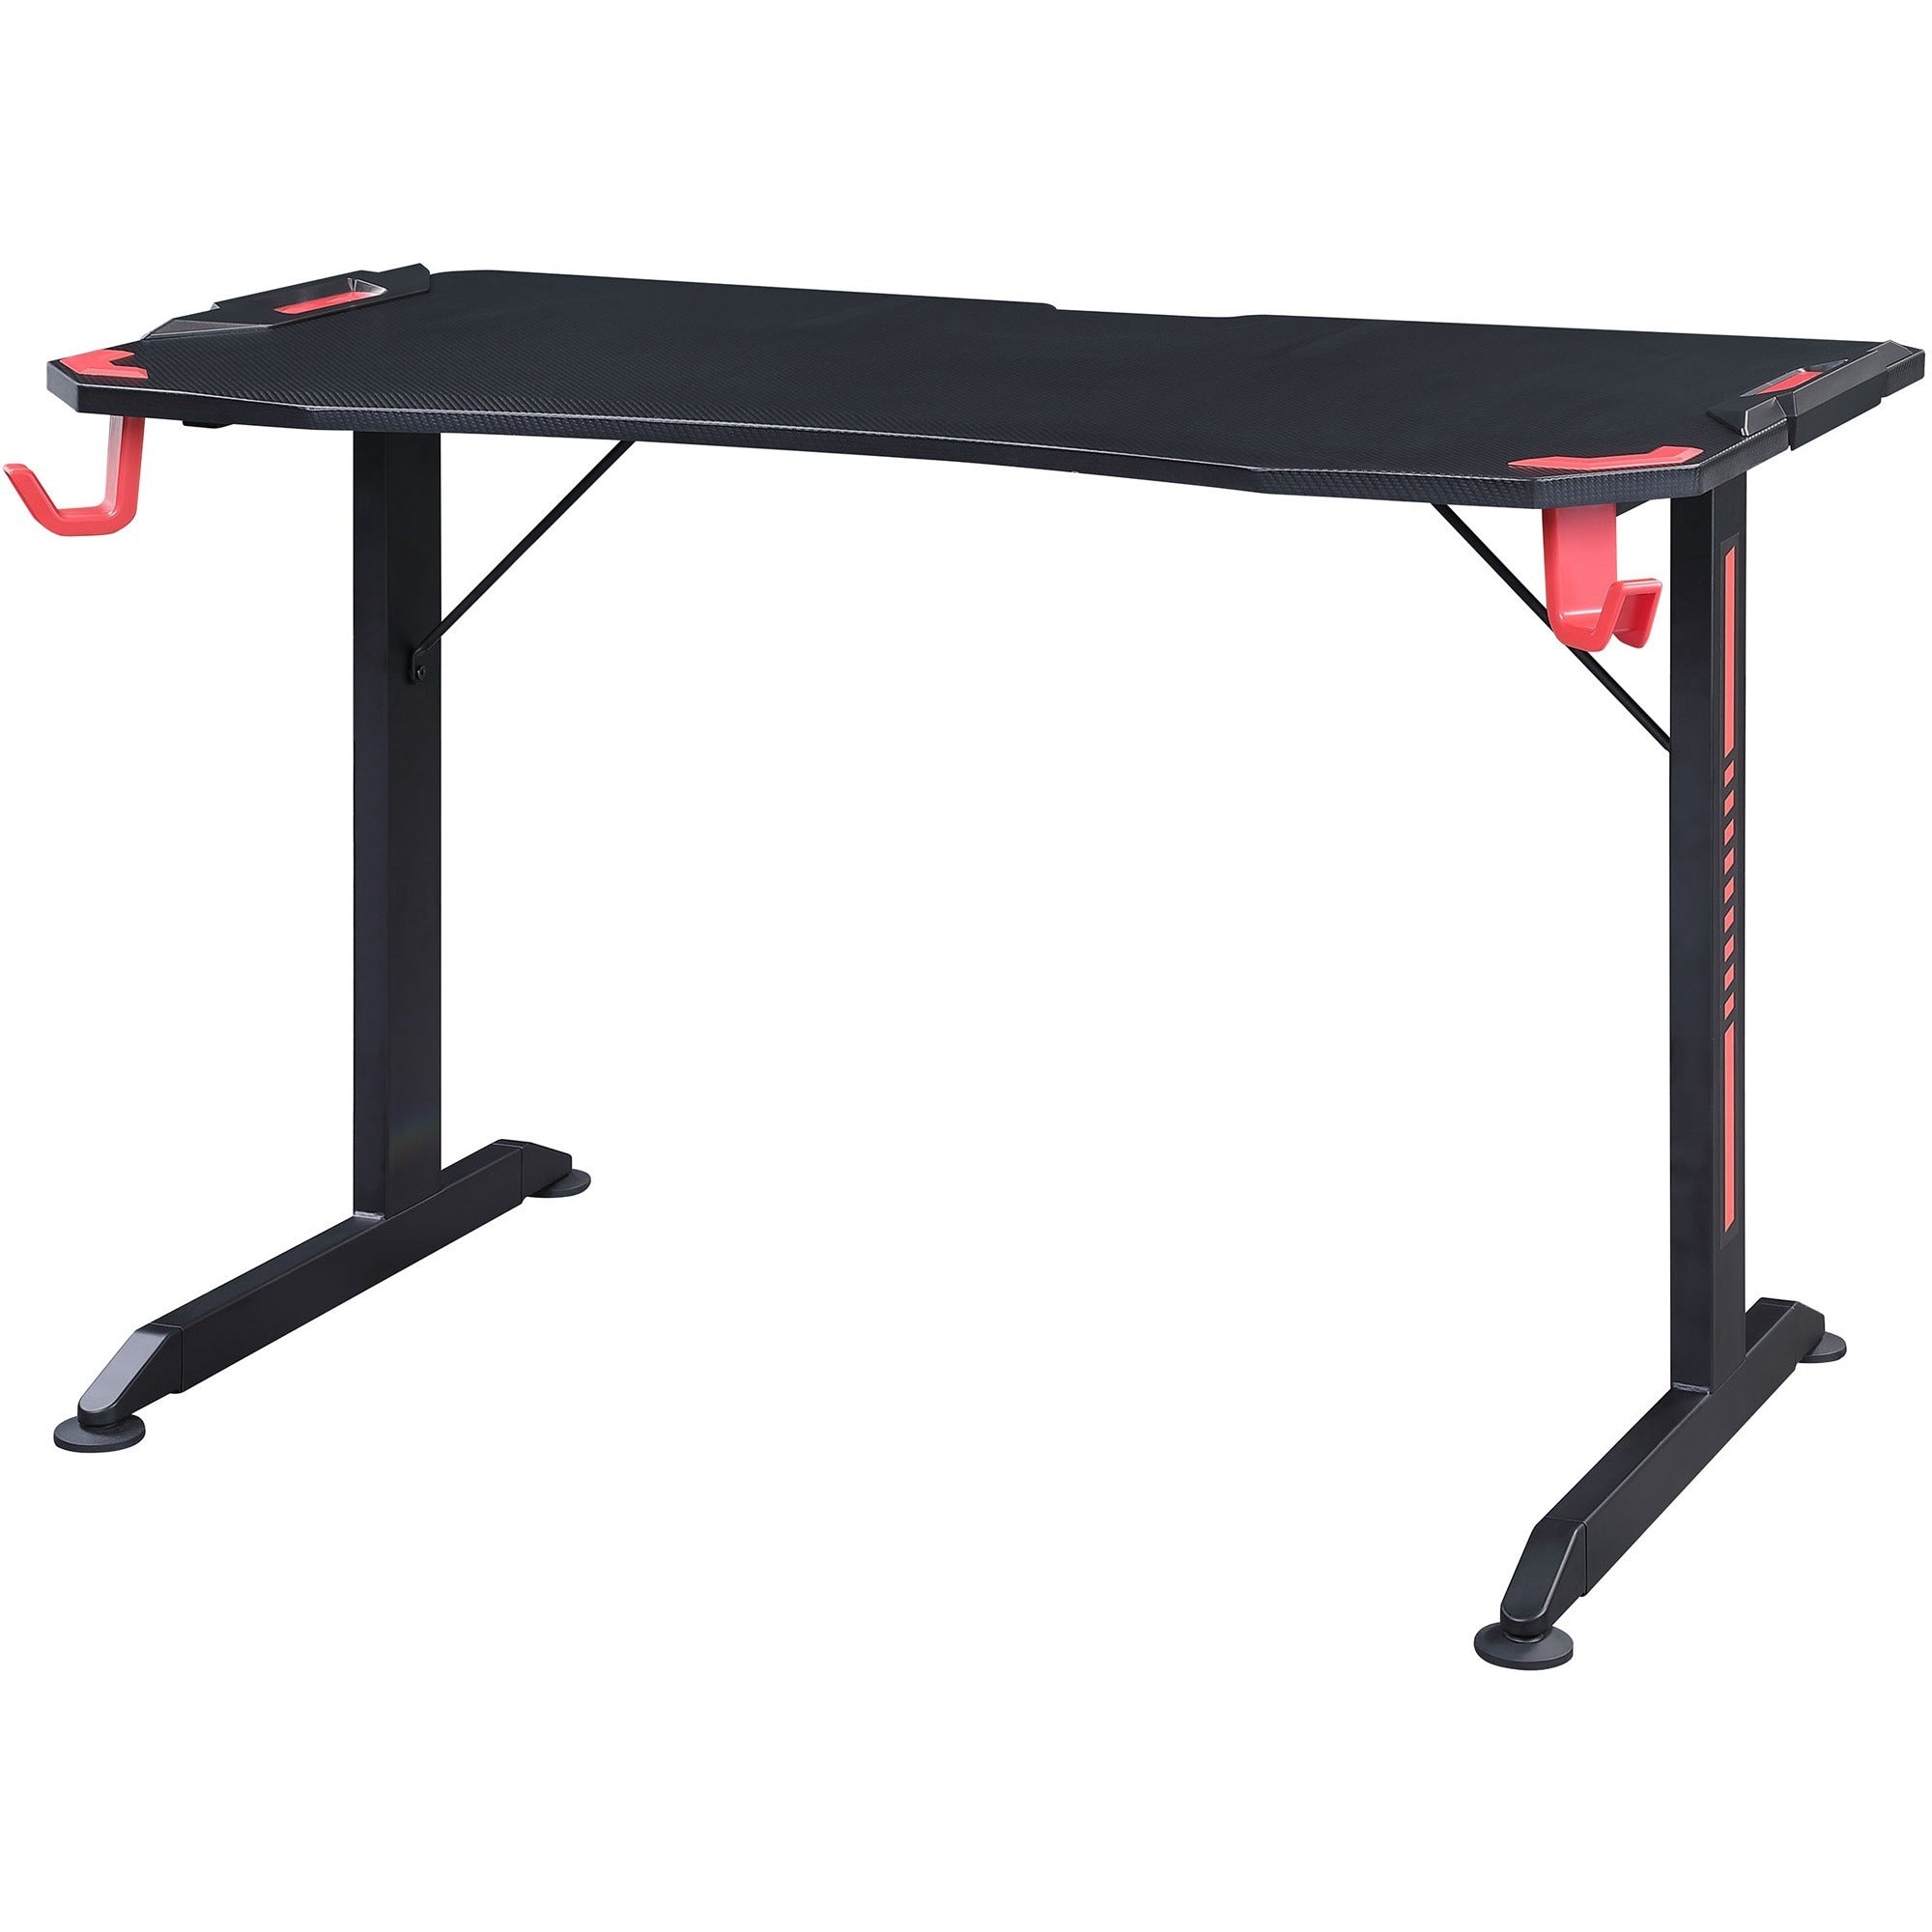 lorell-gaming-desk-powder-coated-base-127-lb-capacity-36-height-x-48-width-x-26-depth-assembly-required-black-1-each_llr84393 - 5